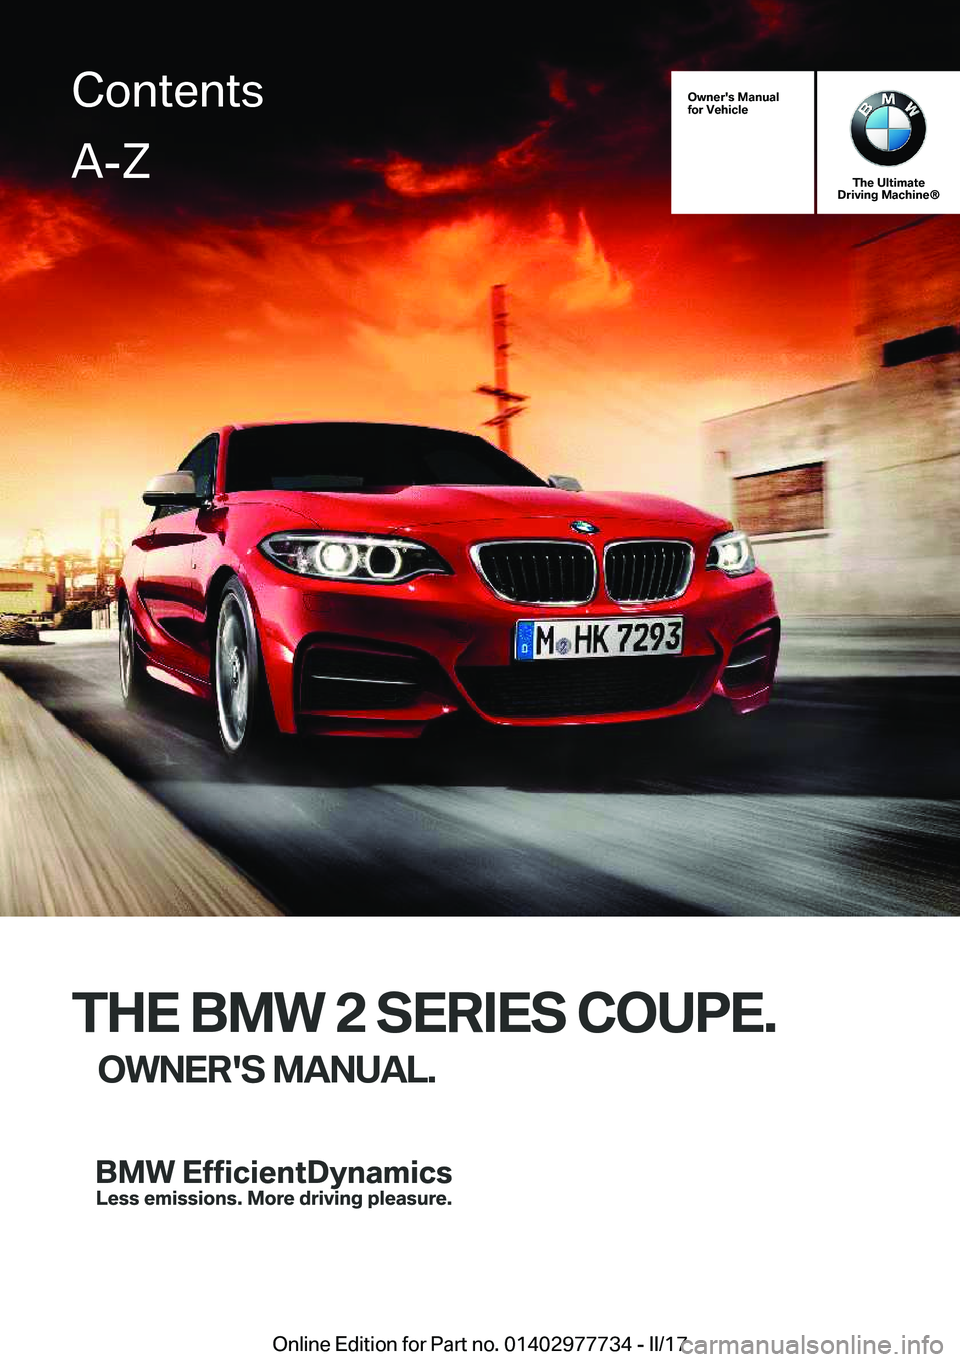 BMW 2 SERIES COUPE 2017  Owners Manual �O�w�n�e�r�'�s��M�a�n�u�a�l
�f�o�r��V�e�h�i�c�l�e
�T�h�e��U�l�t�i�m�a�t�e
�D�r�i�v�i�n�g��M�a�c�h�i�n�e�n
�T�H�E��B�M�W��2��S�E�R�I�E�S��C�O�U�P�E�.
�O�W�N�E�R�'�S��M�A�N�U�A�L�.
�C�o